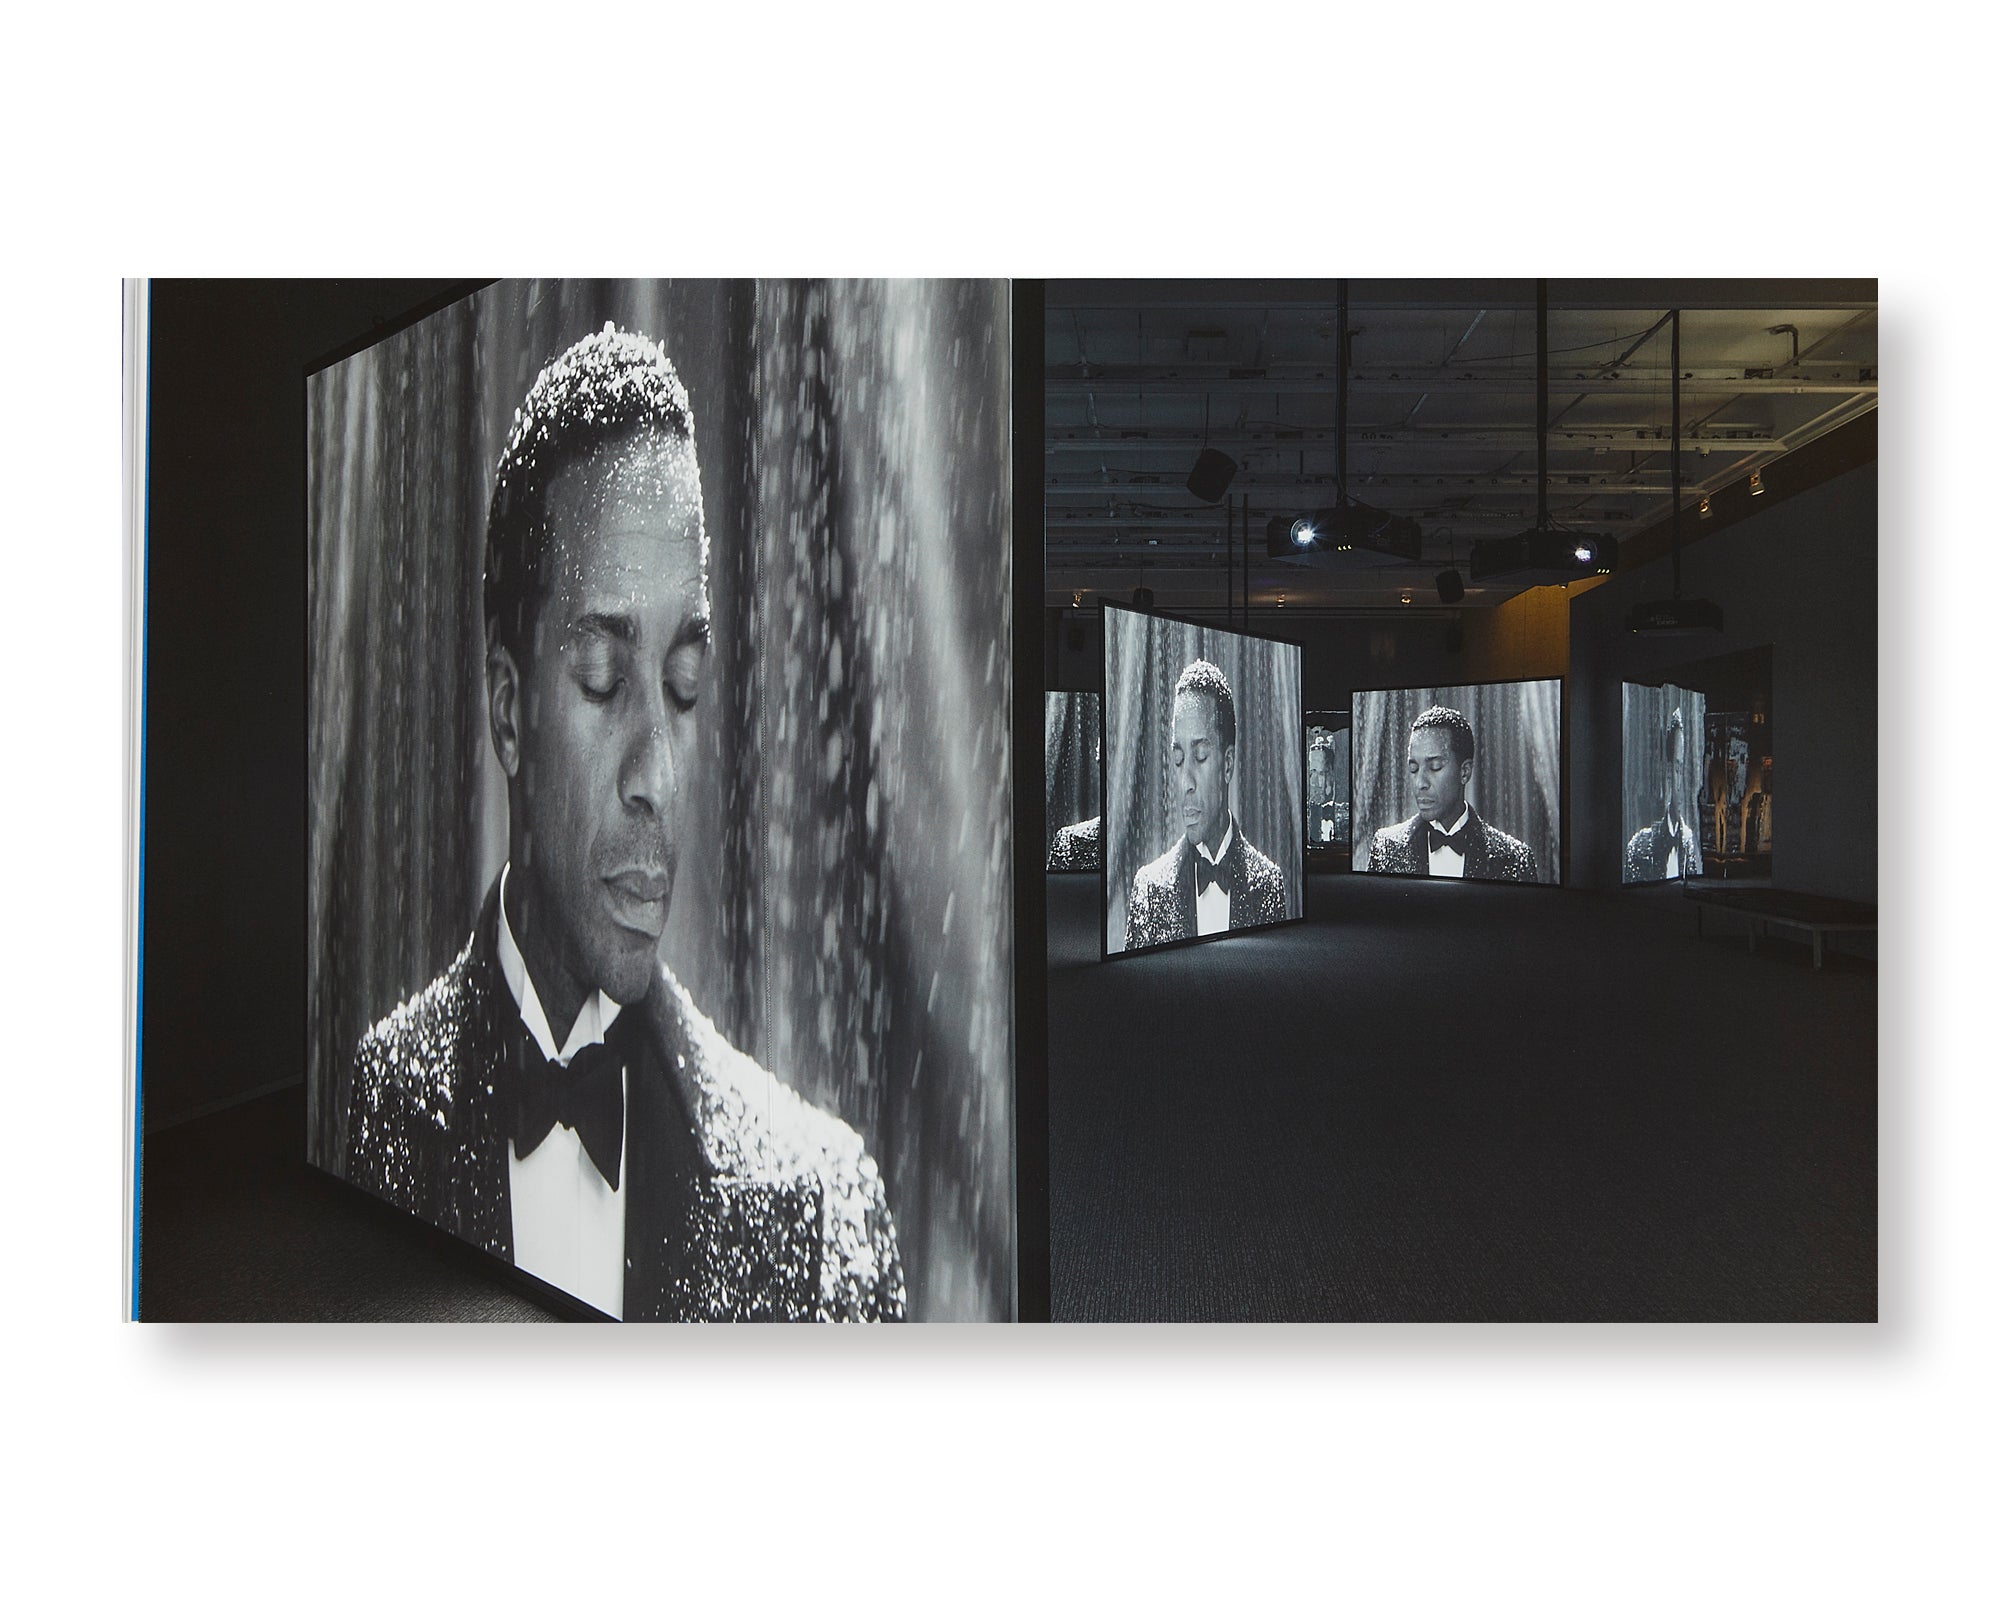 WHAT FREEDOM IS TO ME by Isaac Julien